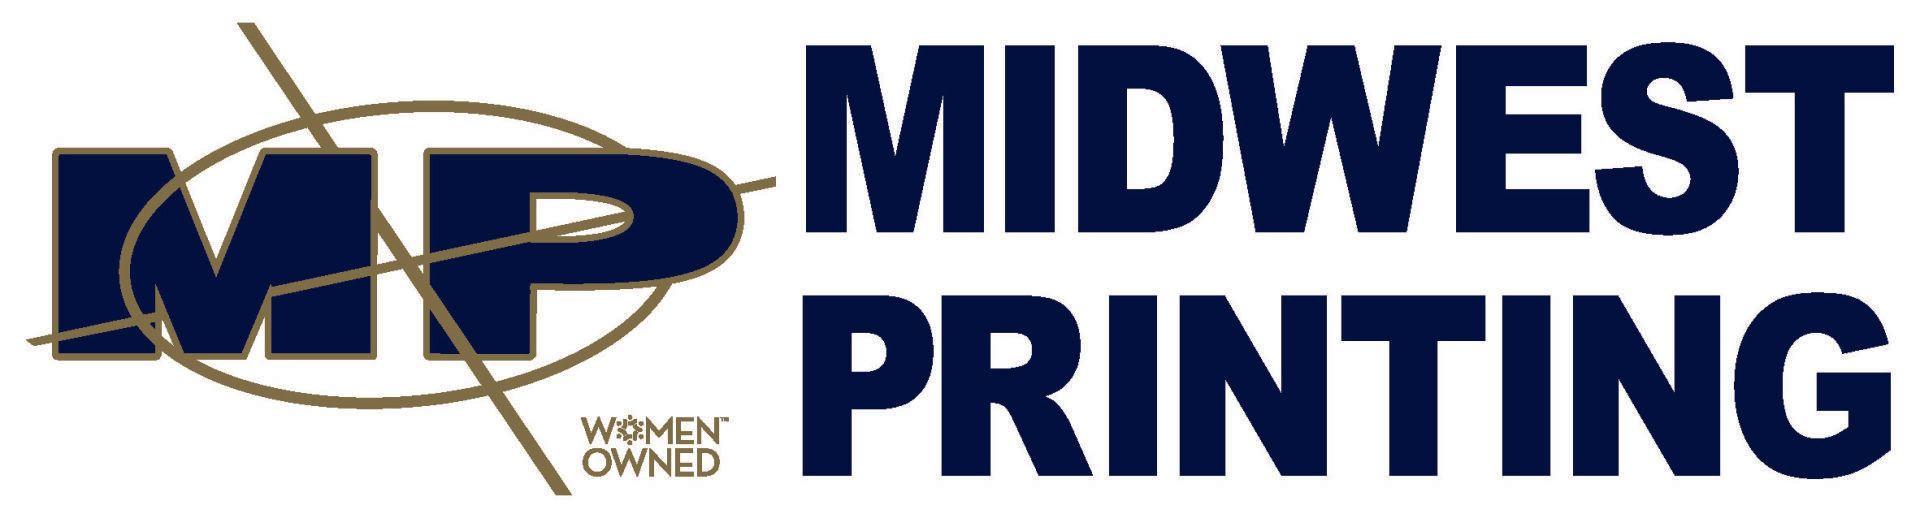 Midwest Printing Co - Logo